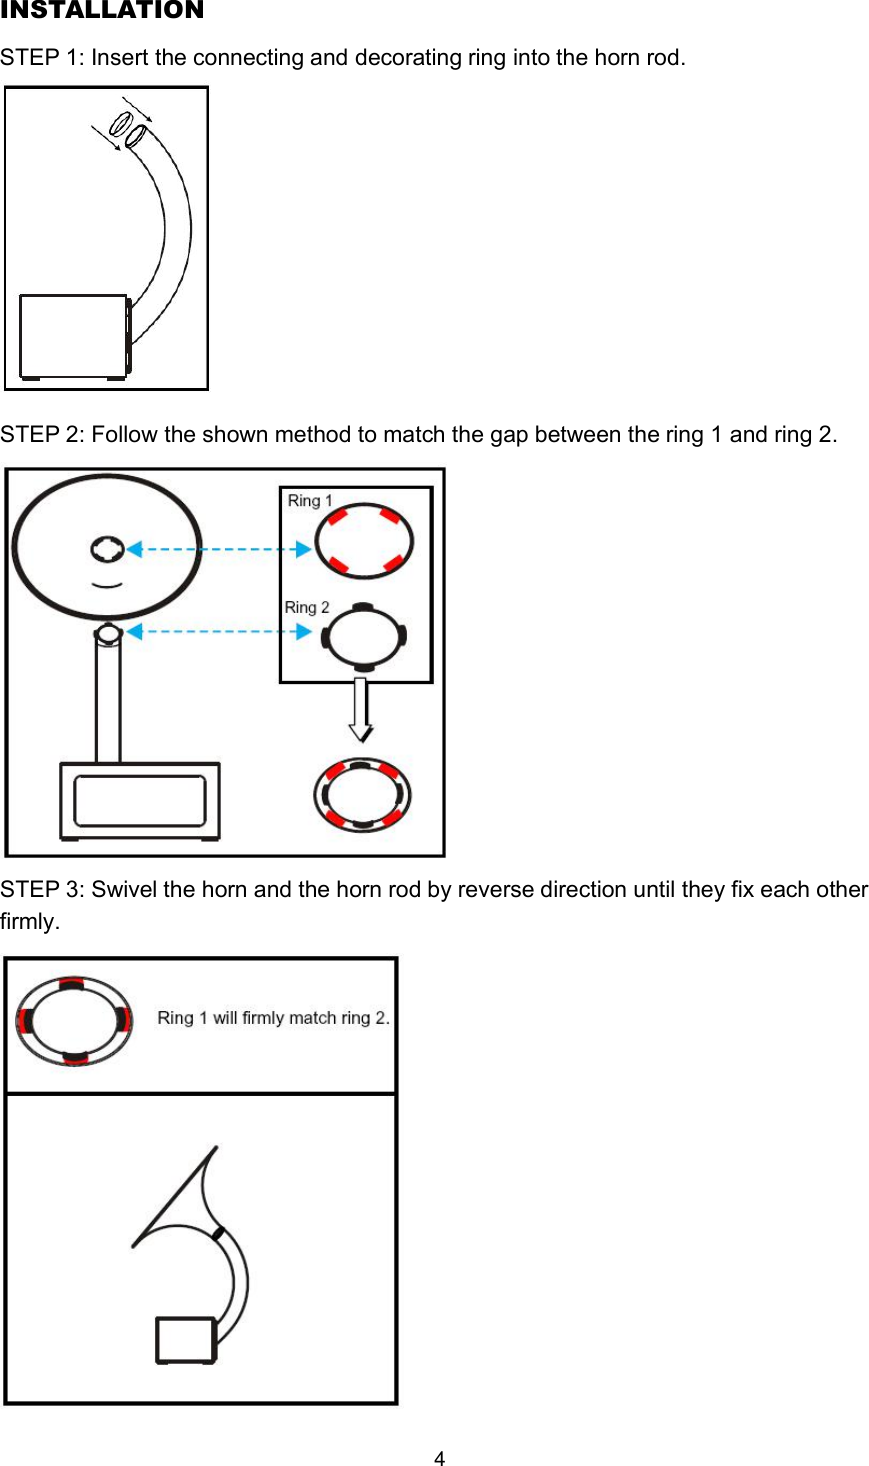 STEP 2: Follow the shown method to match the gap between the ring 1 and ring 2.STEP 3: Swivel the horn and the horn rod by reverse direction until they fix each otherfirmly.INSTALLATIONSTEP 1: Insert the connecting and decorating ring into the horn rod.4